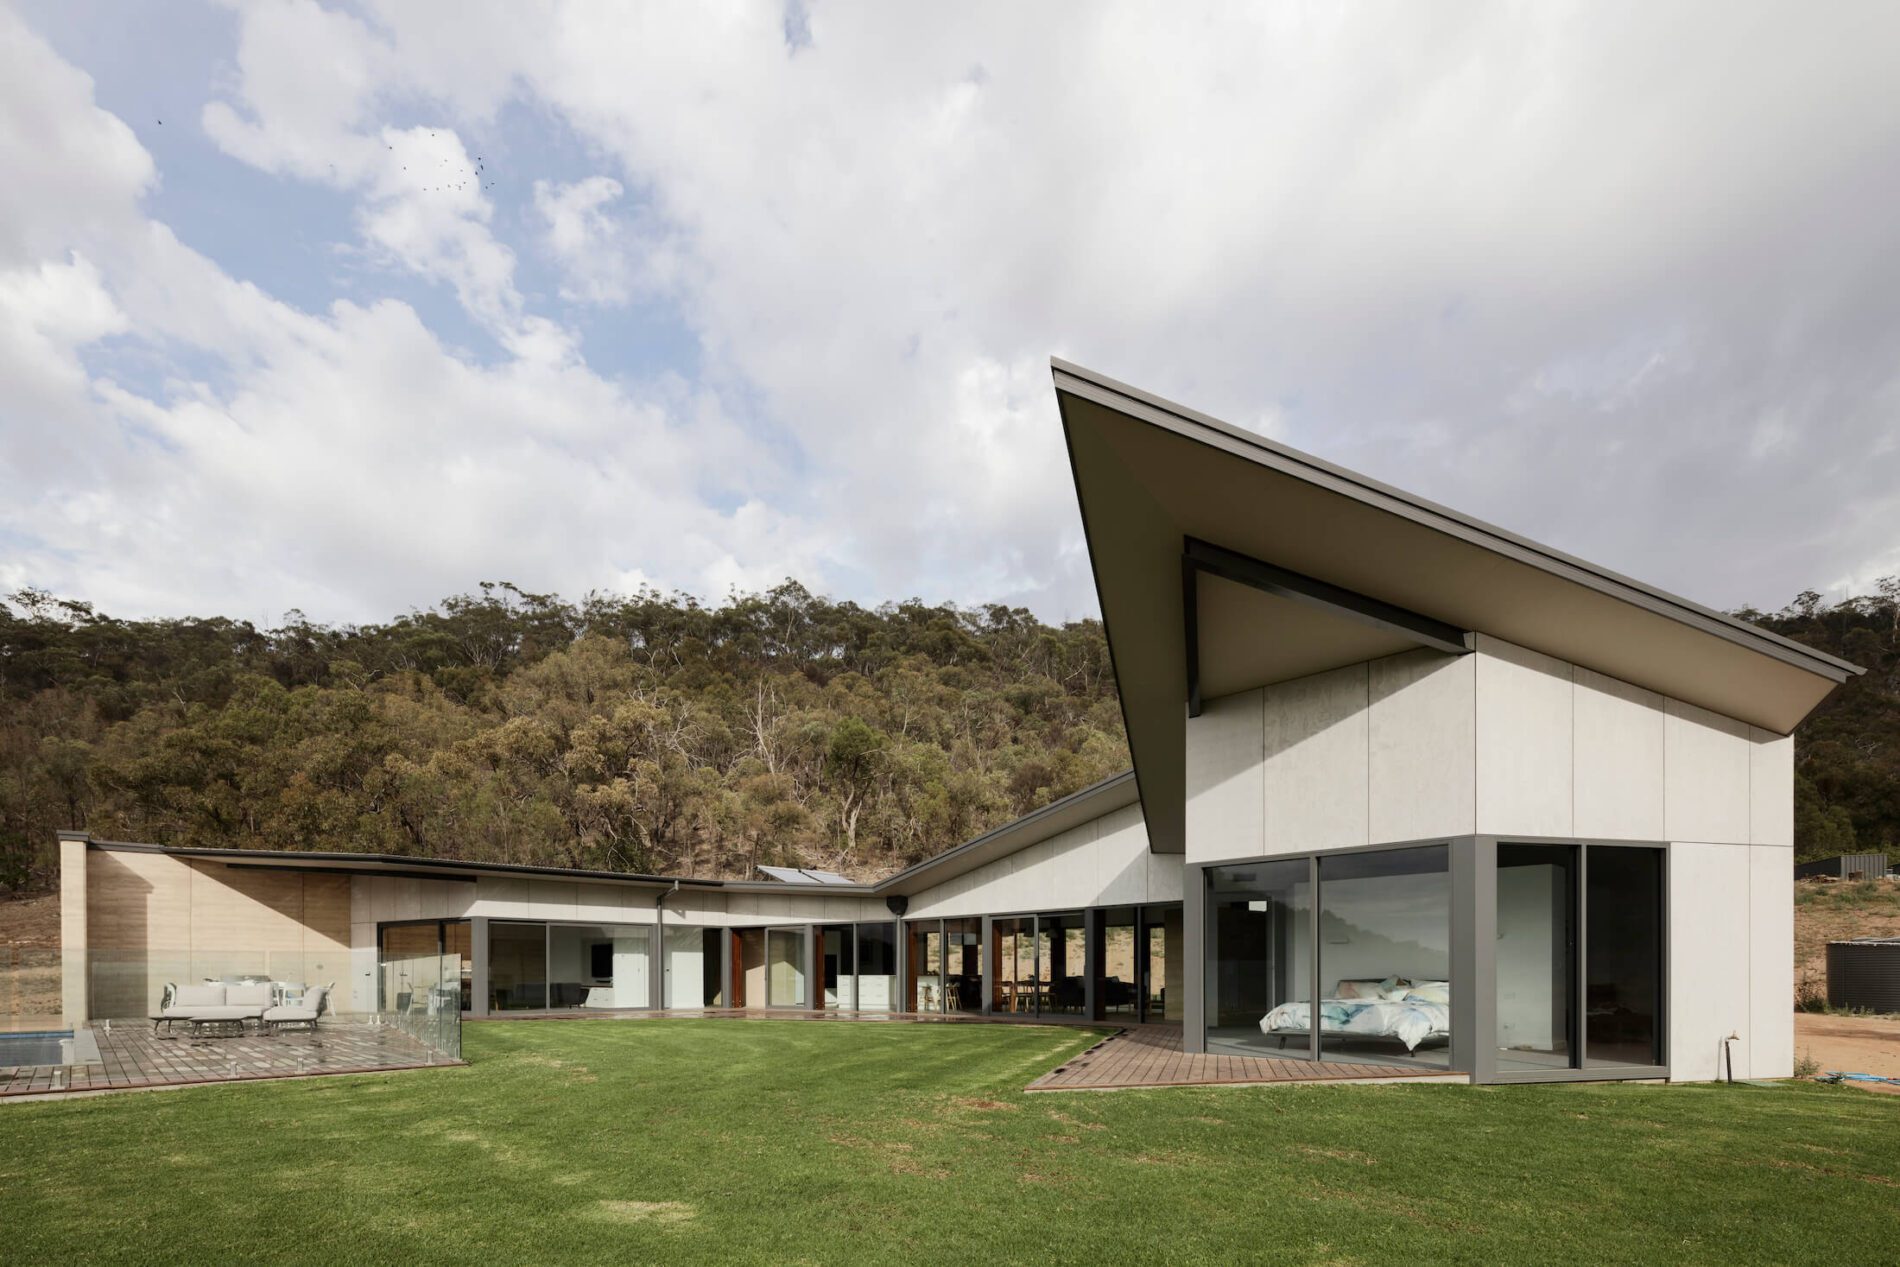 Contemporary residential home in the bush with angled canopy over main bedroom, bush beyond